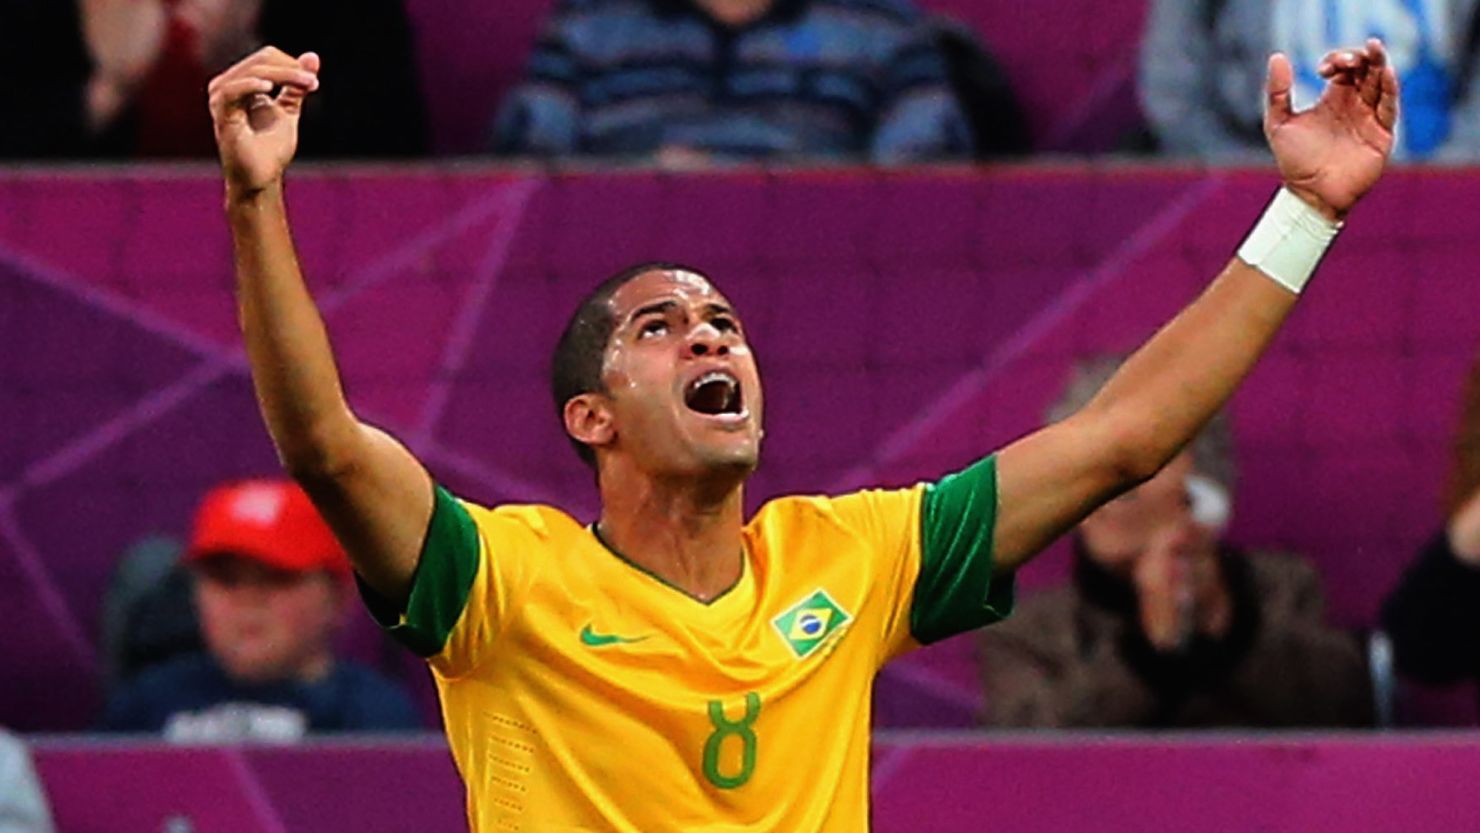 Defensive midfielder Romulo scored the first goal in Brazil's 3-0 semifinal defeat of South Korea.